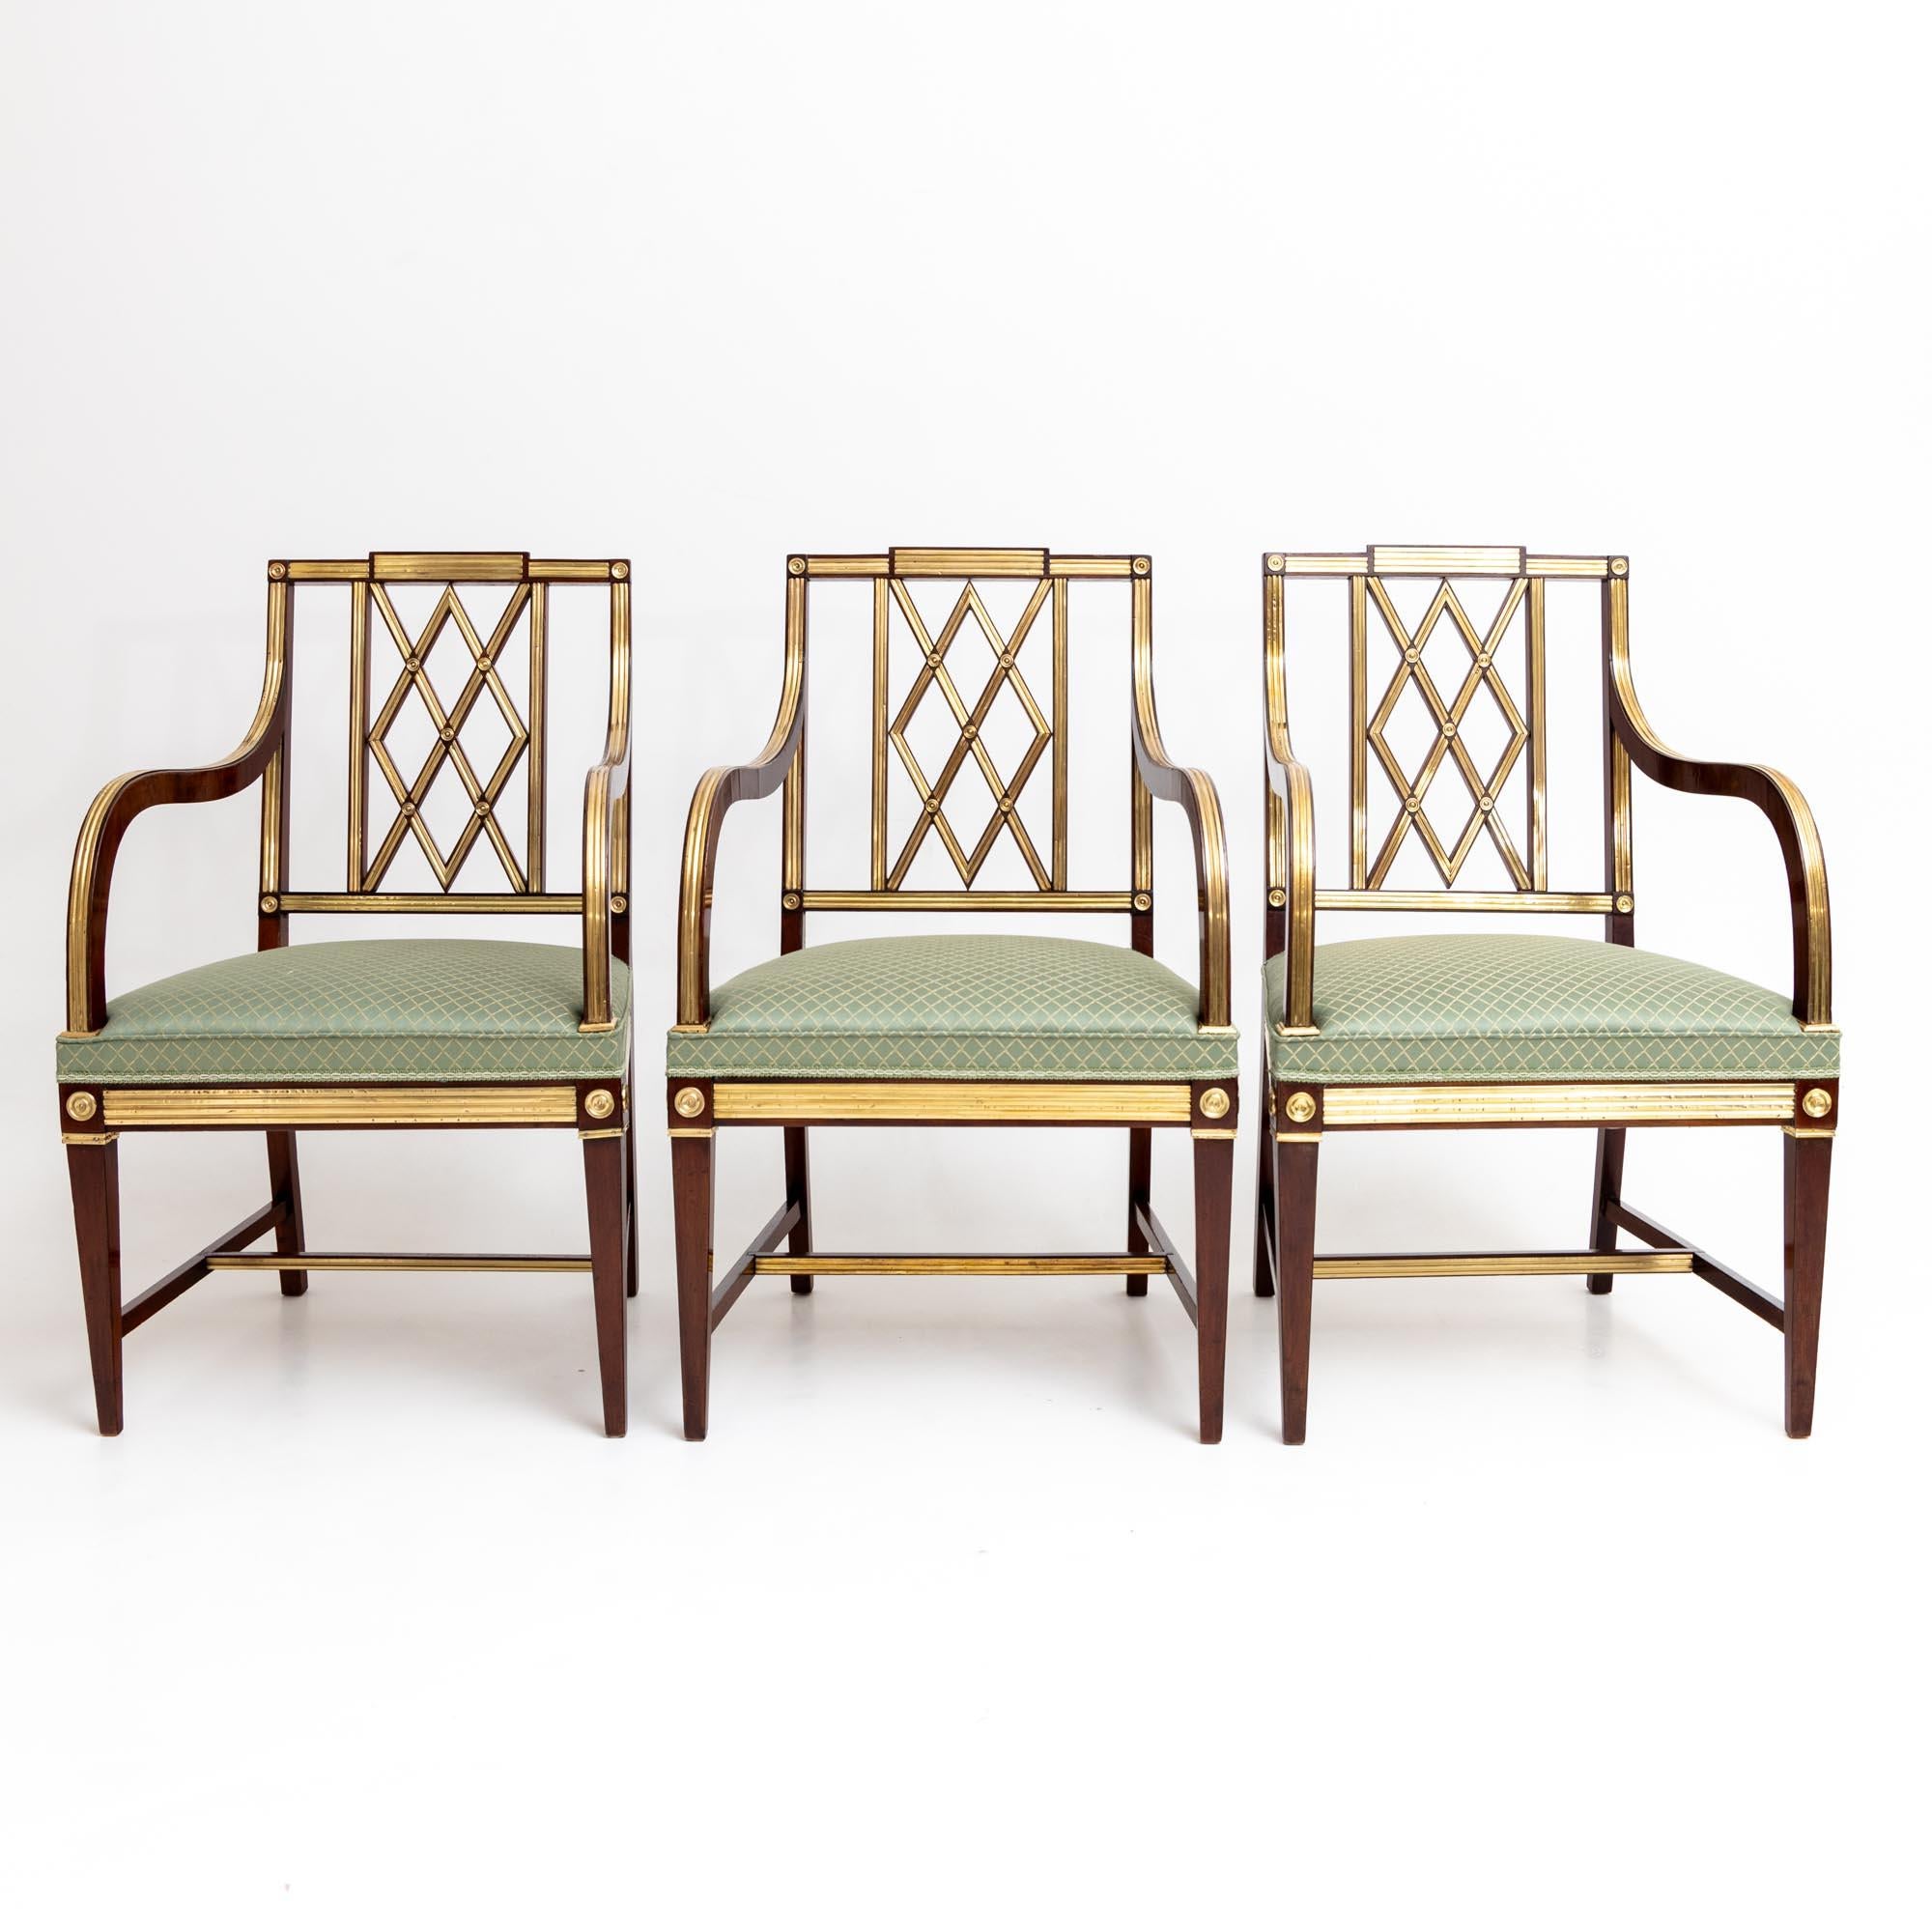 Three Neoclassical Armchairs, Baltic States, Late 18th Century For Sale 4